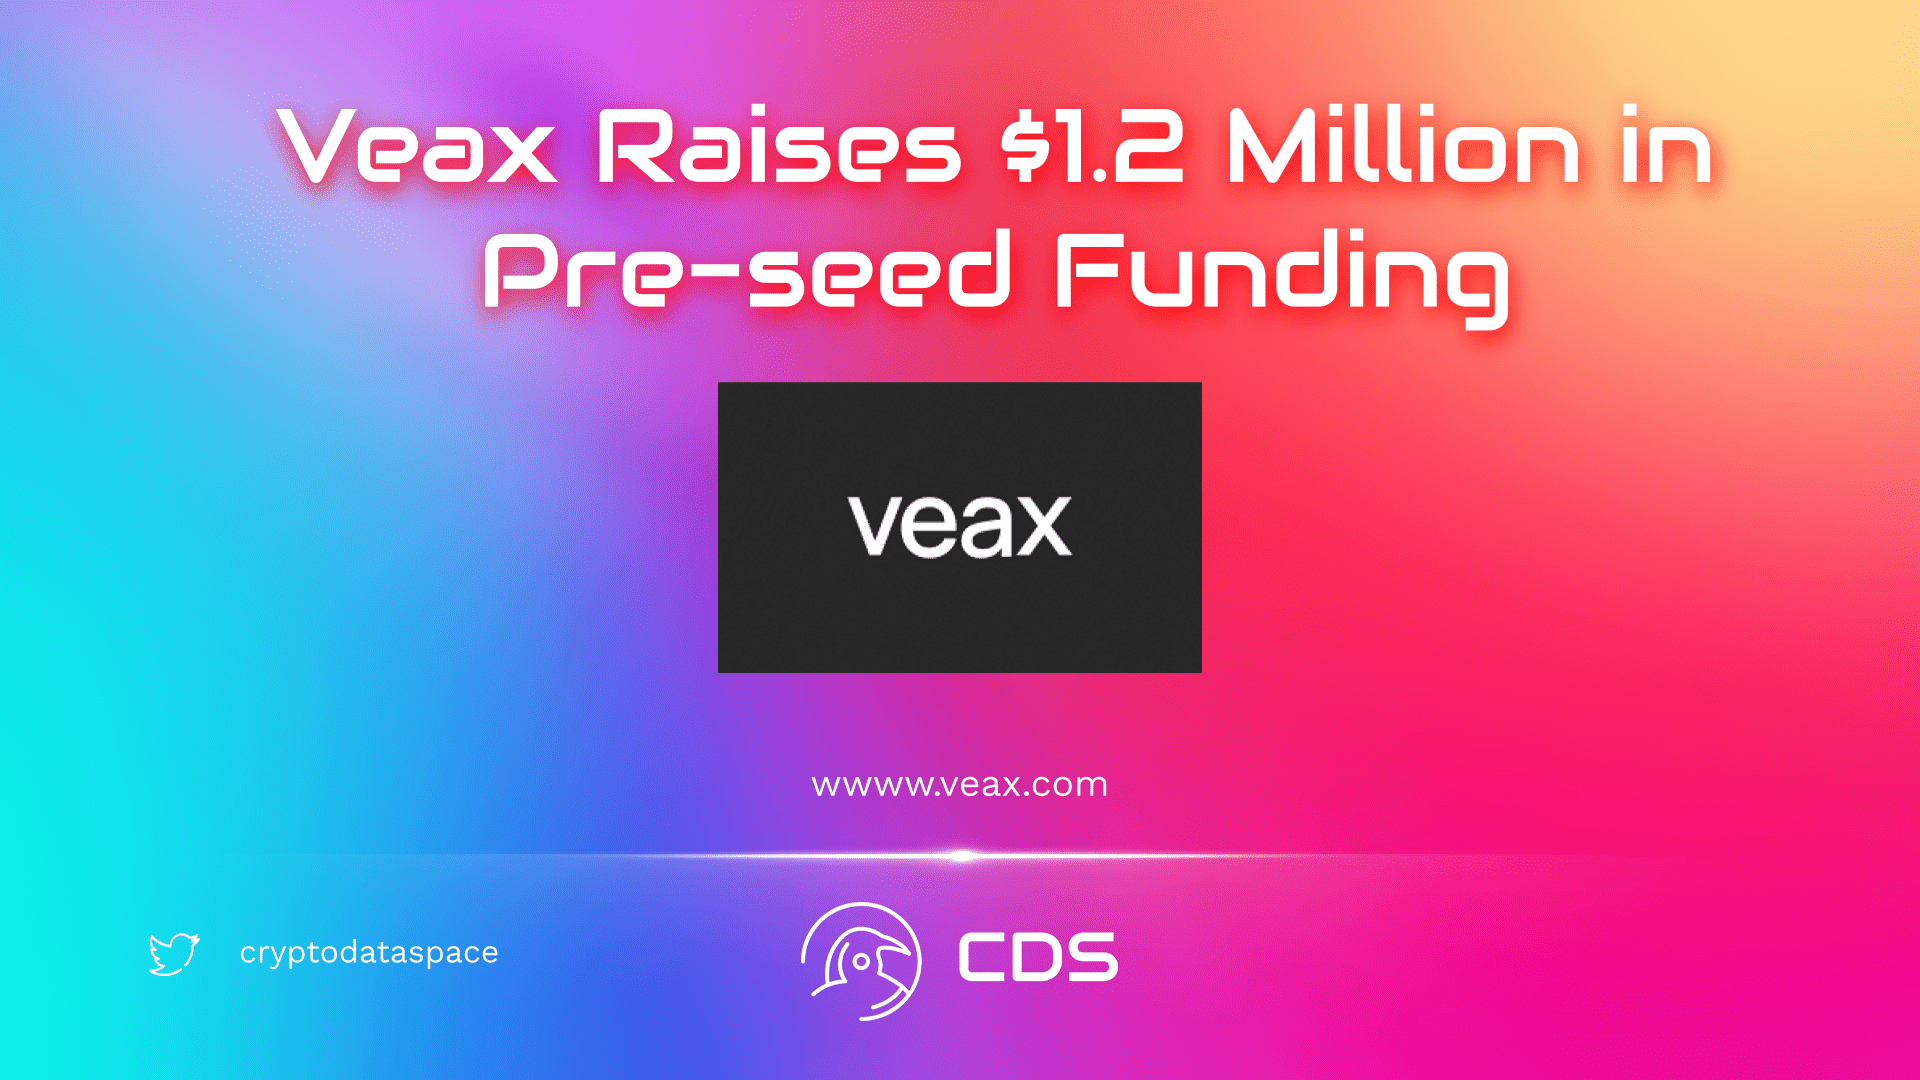 Veax, a Decentralized Derivative Trading Protocol on NEAR, Raises $1.2 Million in Pre-seed Funding